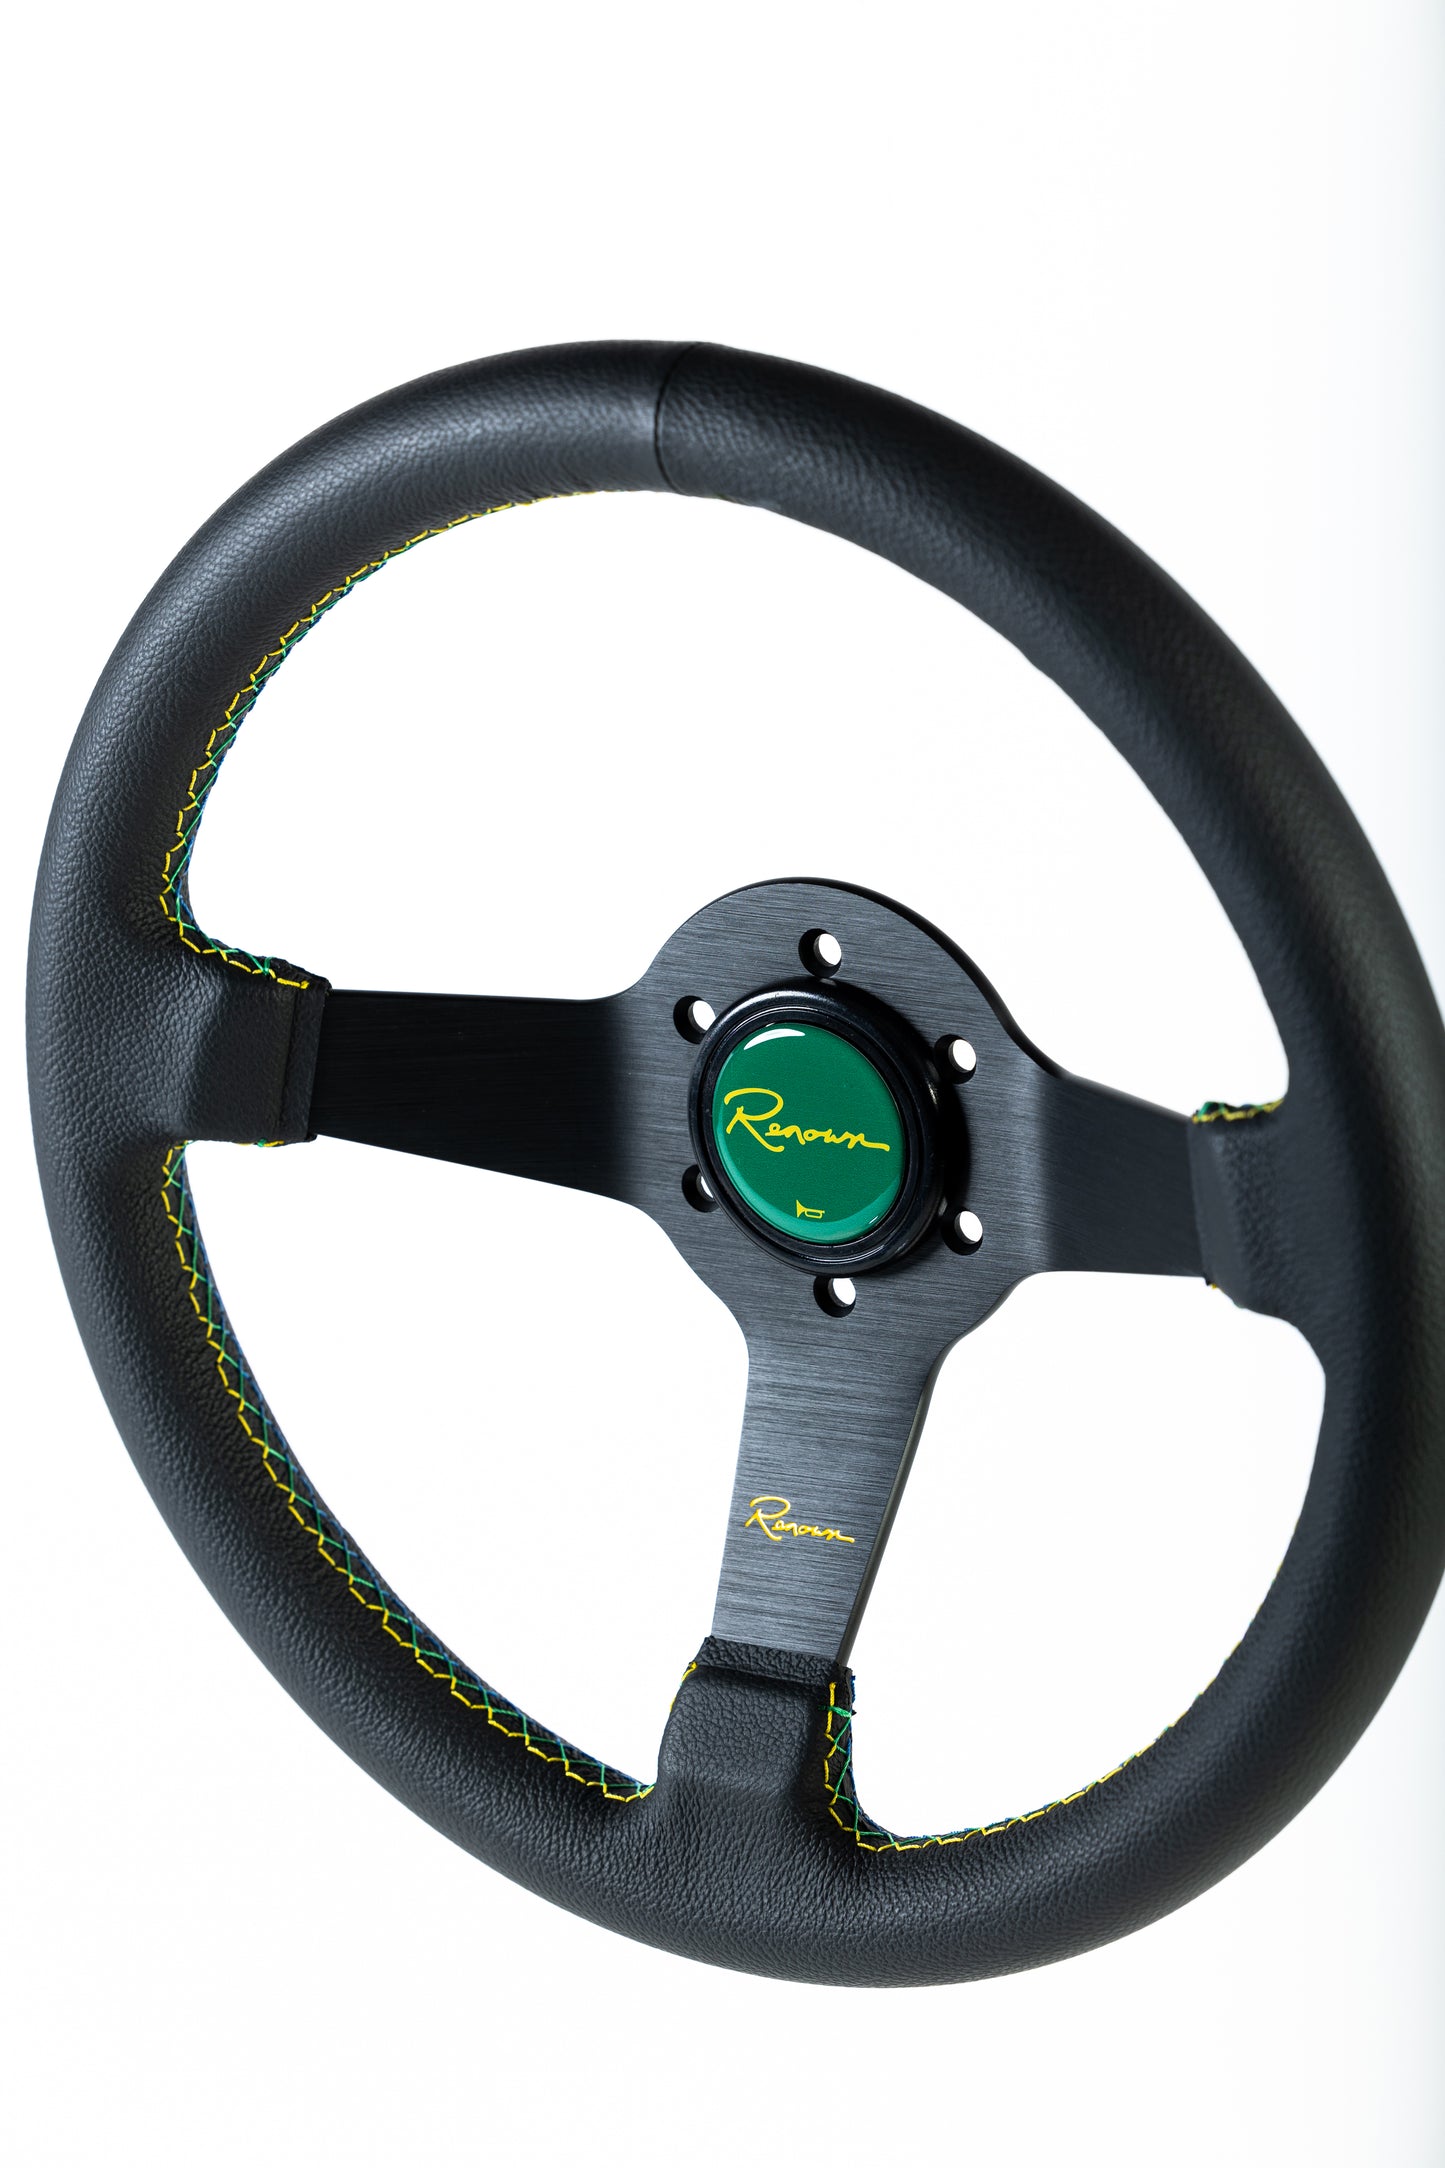 LIMITED Renown Time Trial Brazil Steering Wheel